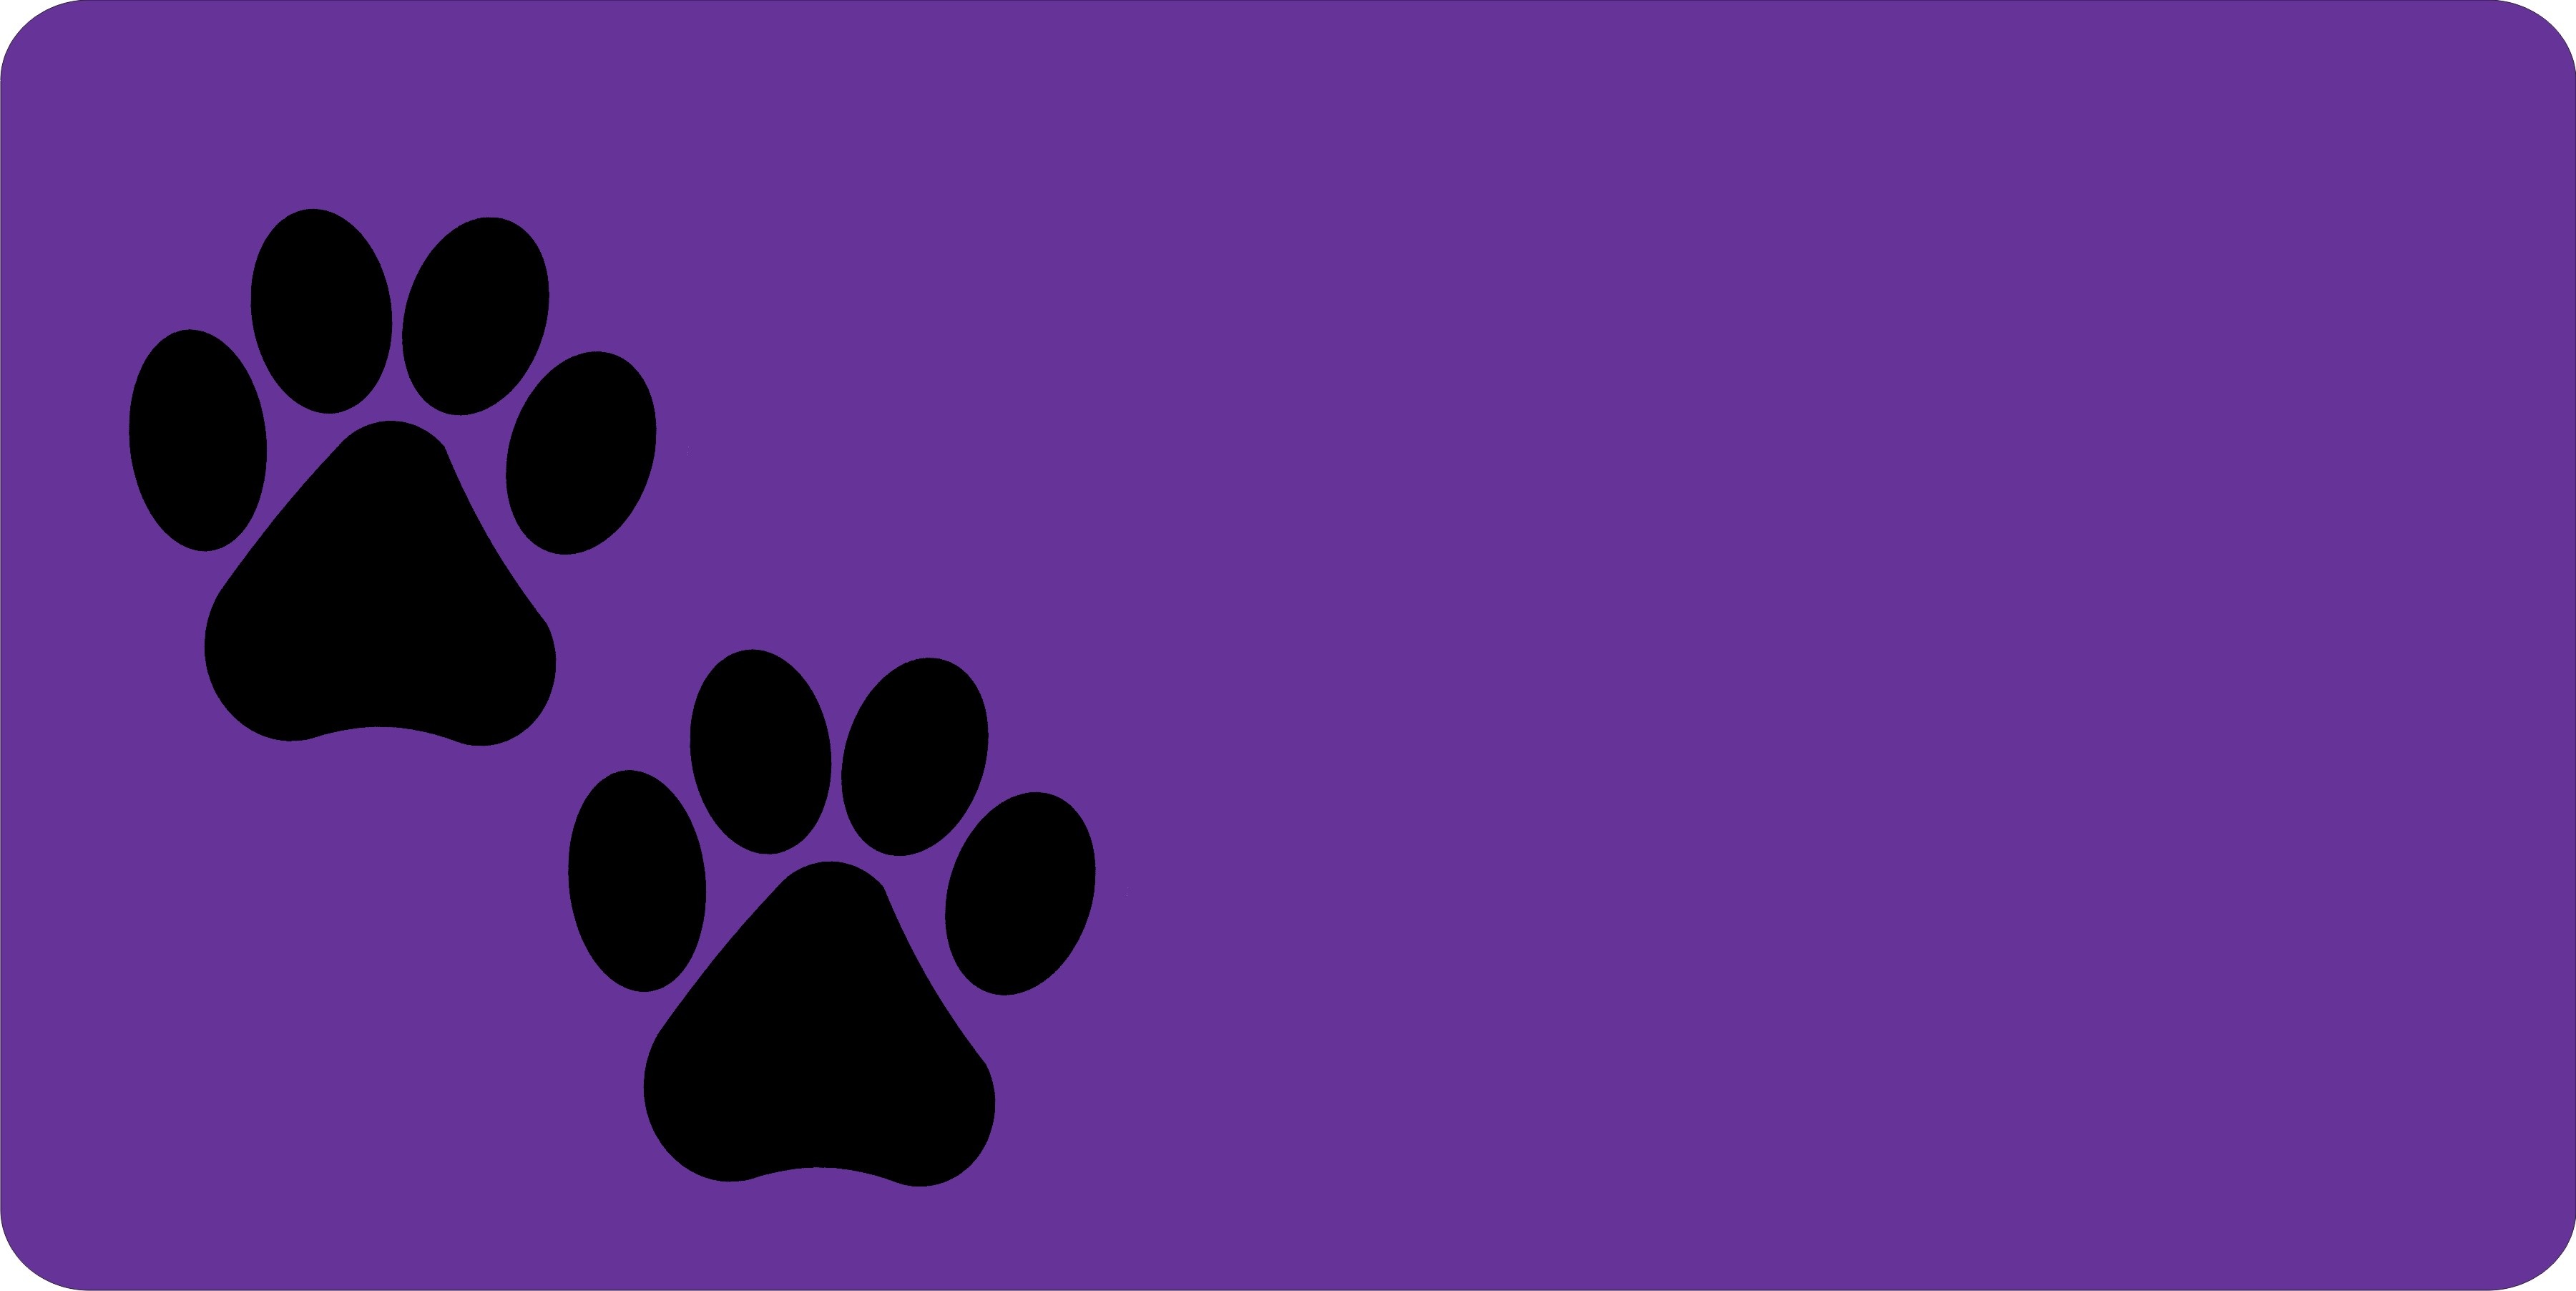 Black Paw Prints Offset On Purple LICENSE PLATE Free Personalization on this PLATE